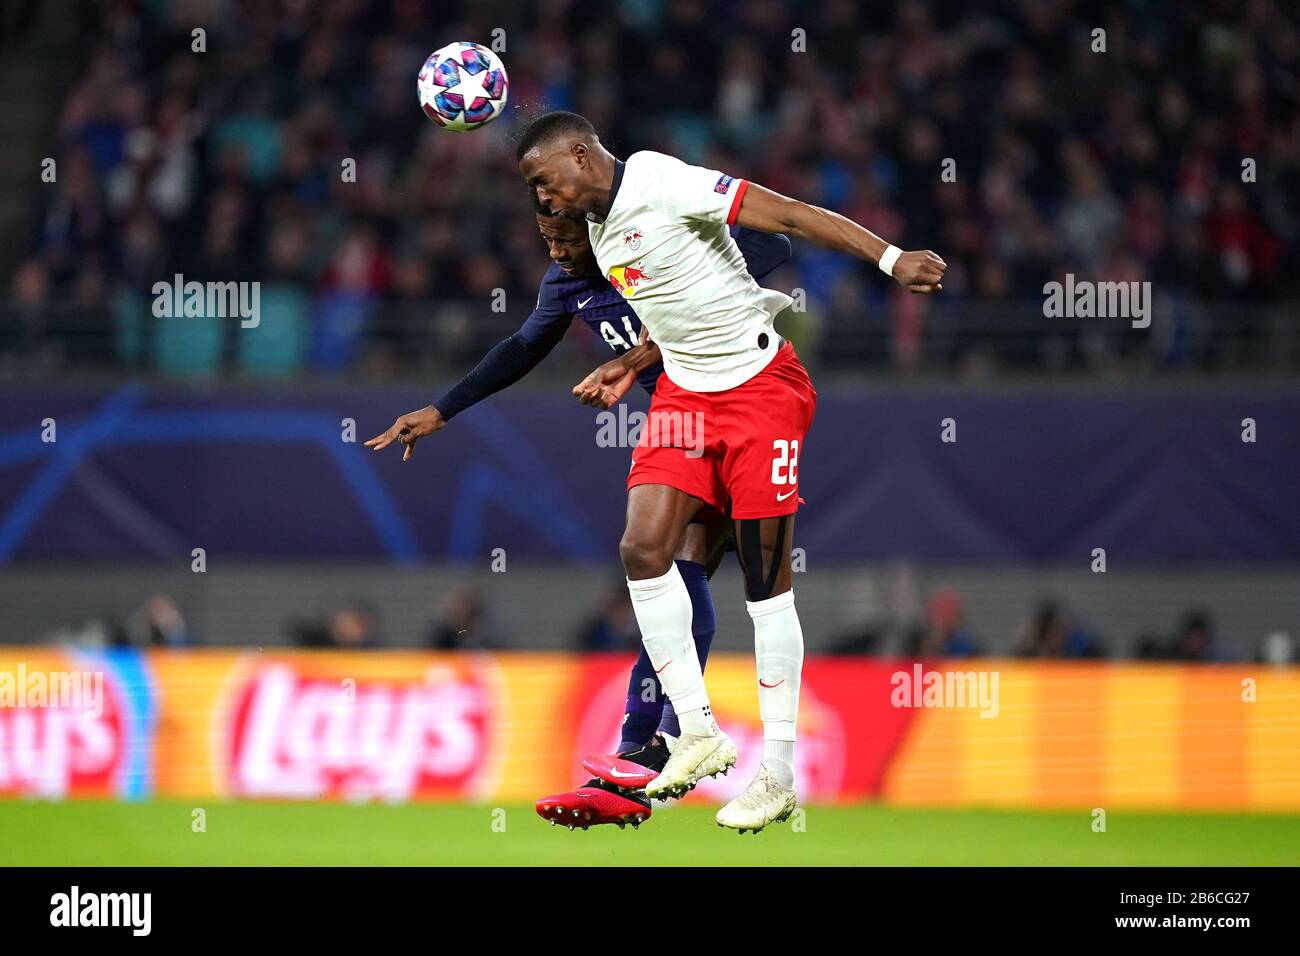 Tottenham Hotspur's Ryan Sessegnon (left) and RB Leipzig's Nordi Mukiele battle for the ball during the UEFA Champions League round of 16 second leg match at the Red Bull Arena, Leipzig. Stock Photo